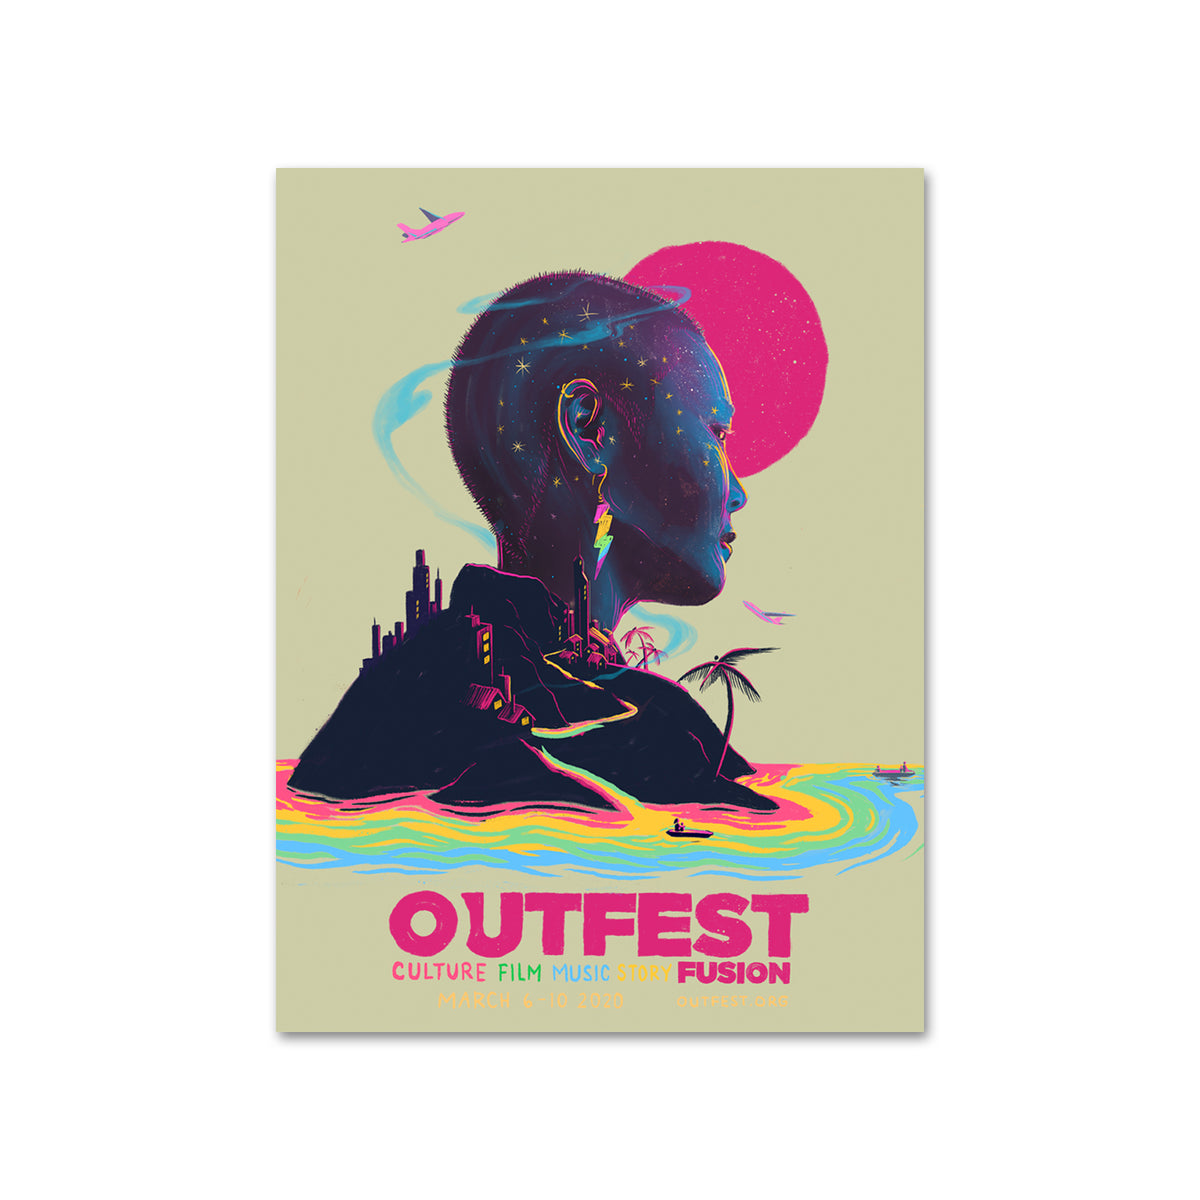 2020 Outfest Fusion Poster 18" x 24"